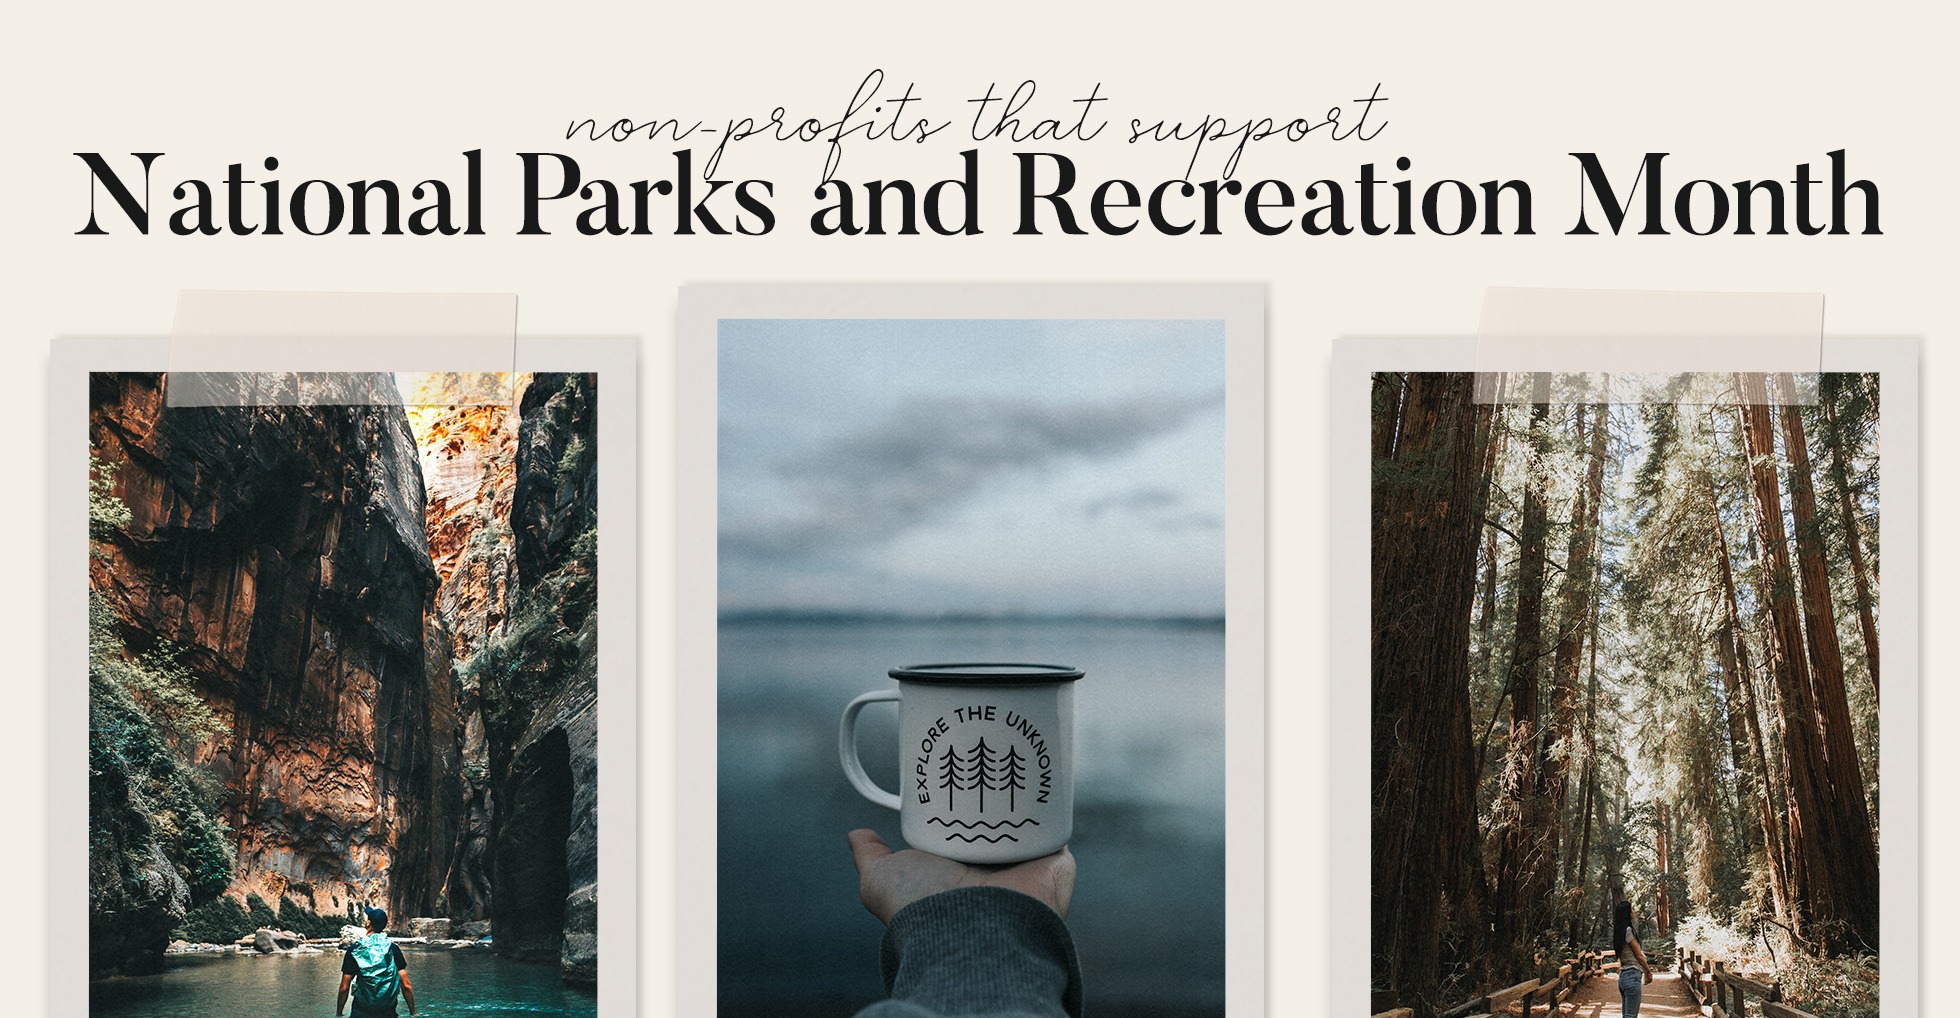 22 Nonprofits to Support National Parks and Recreation